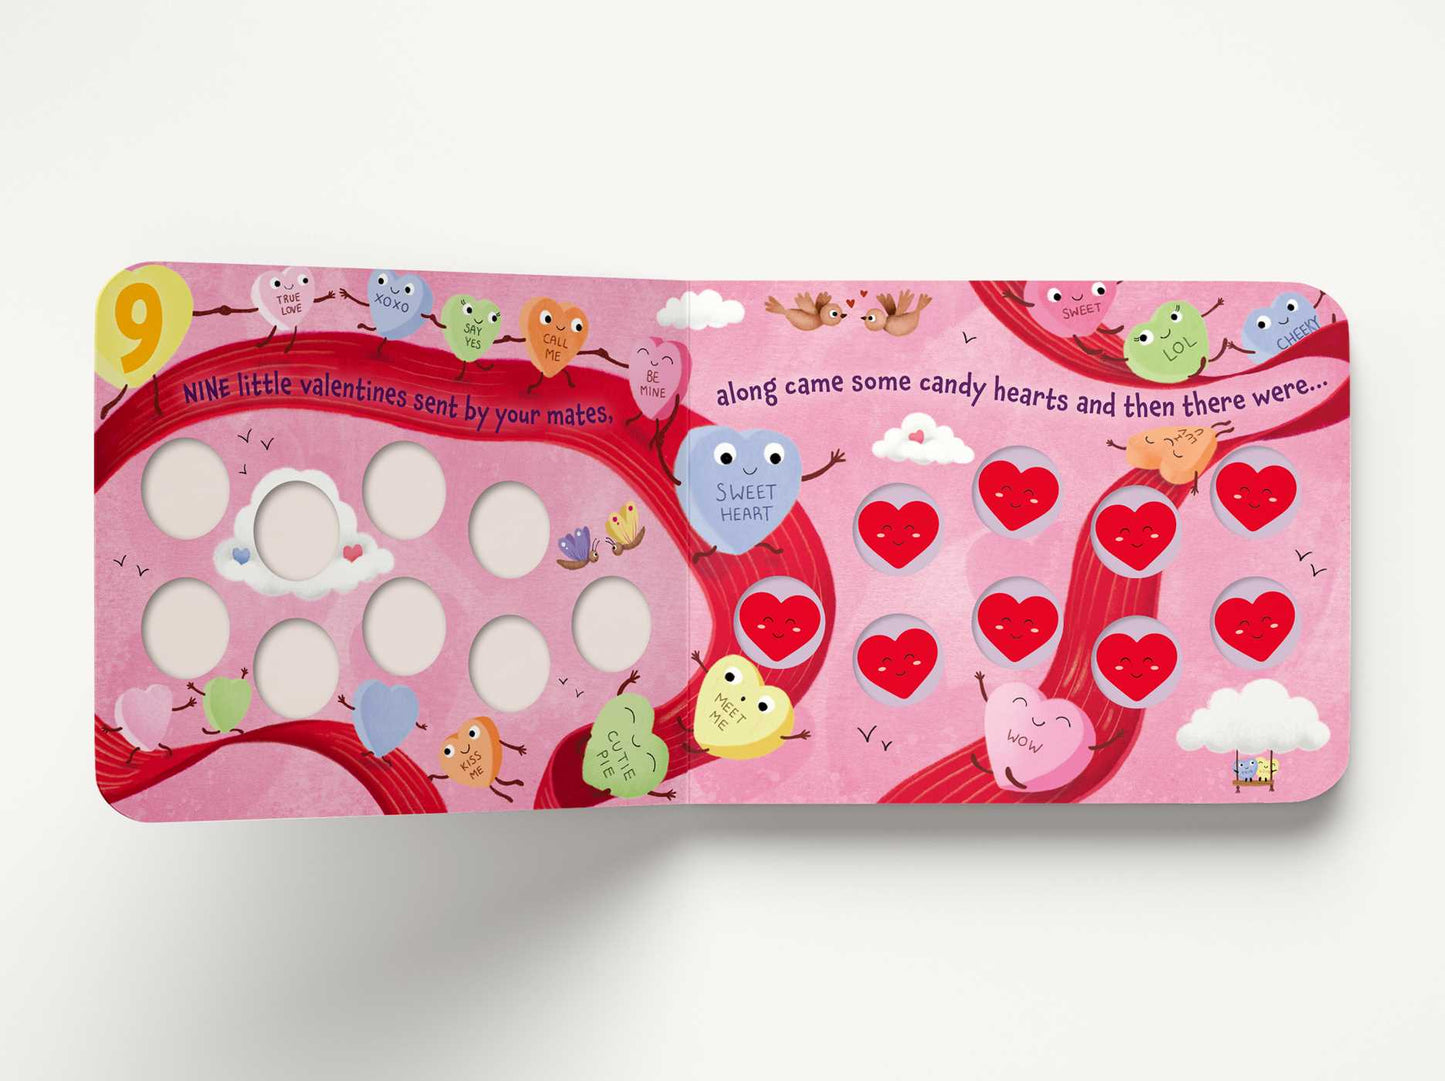 Ten Little Valentines: A Magical Counting Storybook of Love